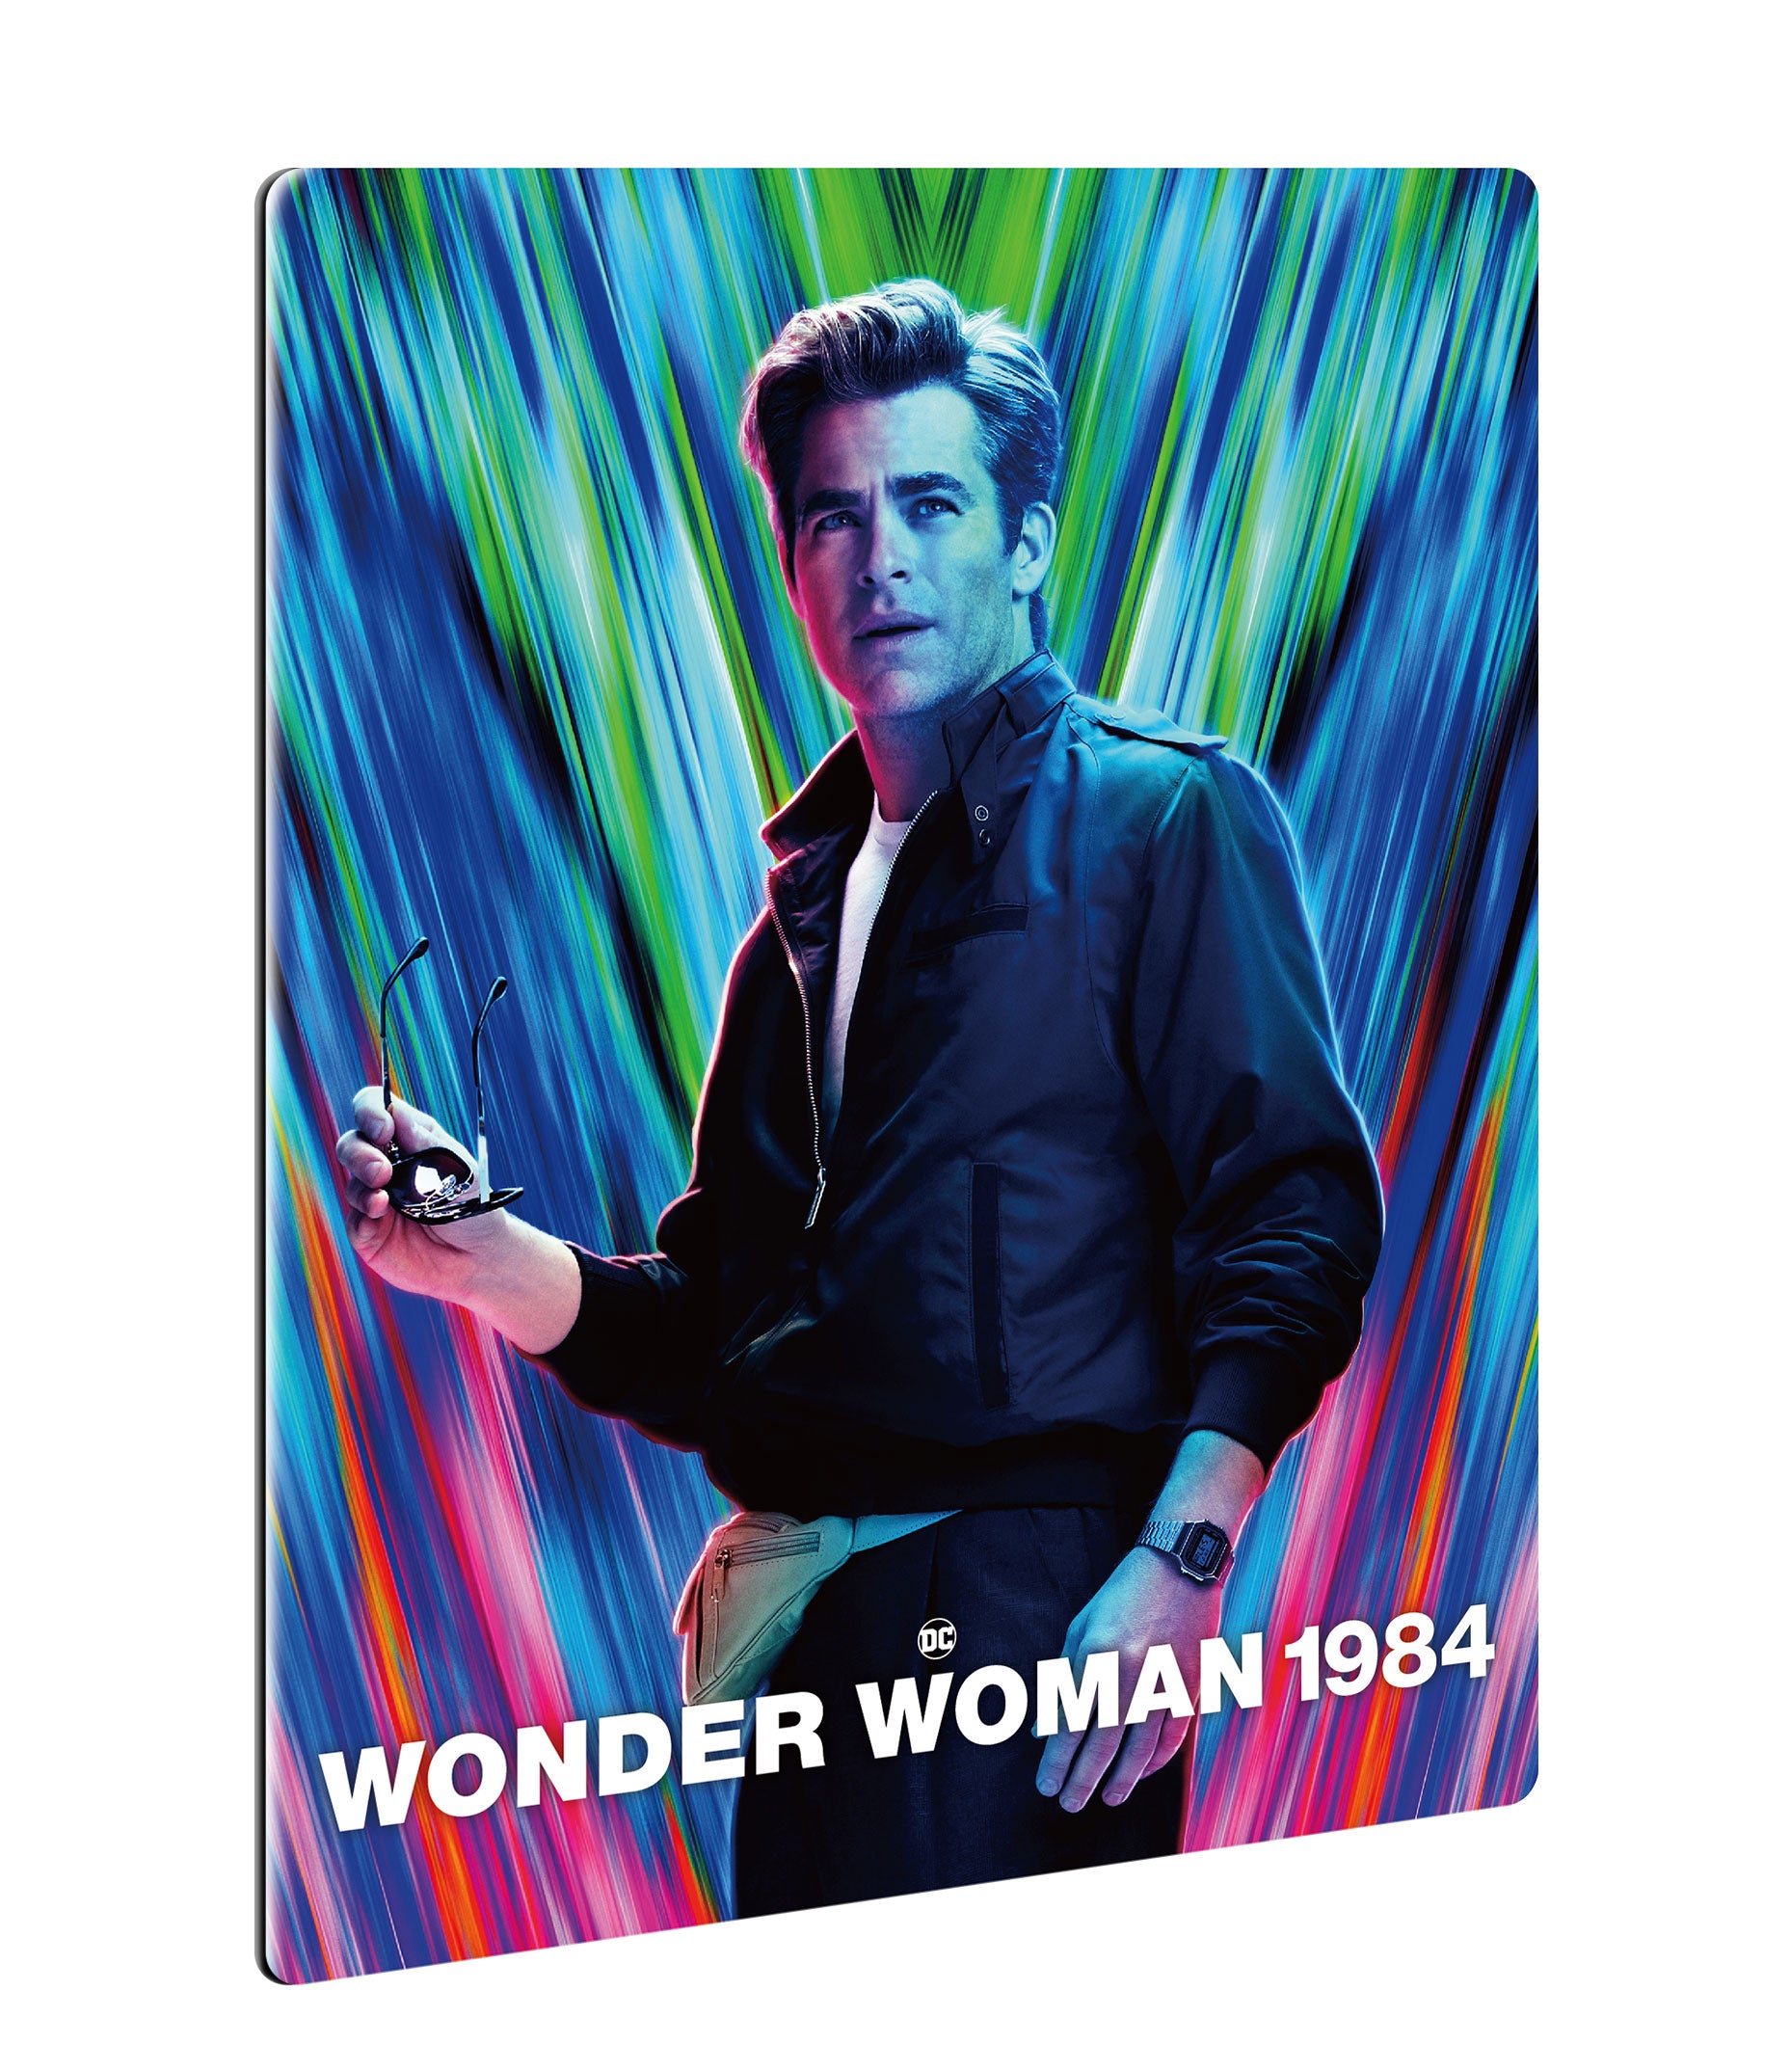 ME#38] Wonder Woman 1984 Steelbook (One Click) - Collectong